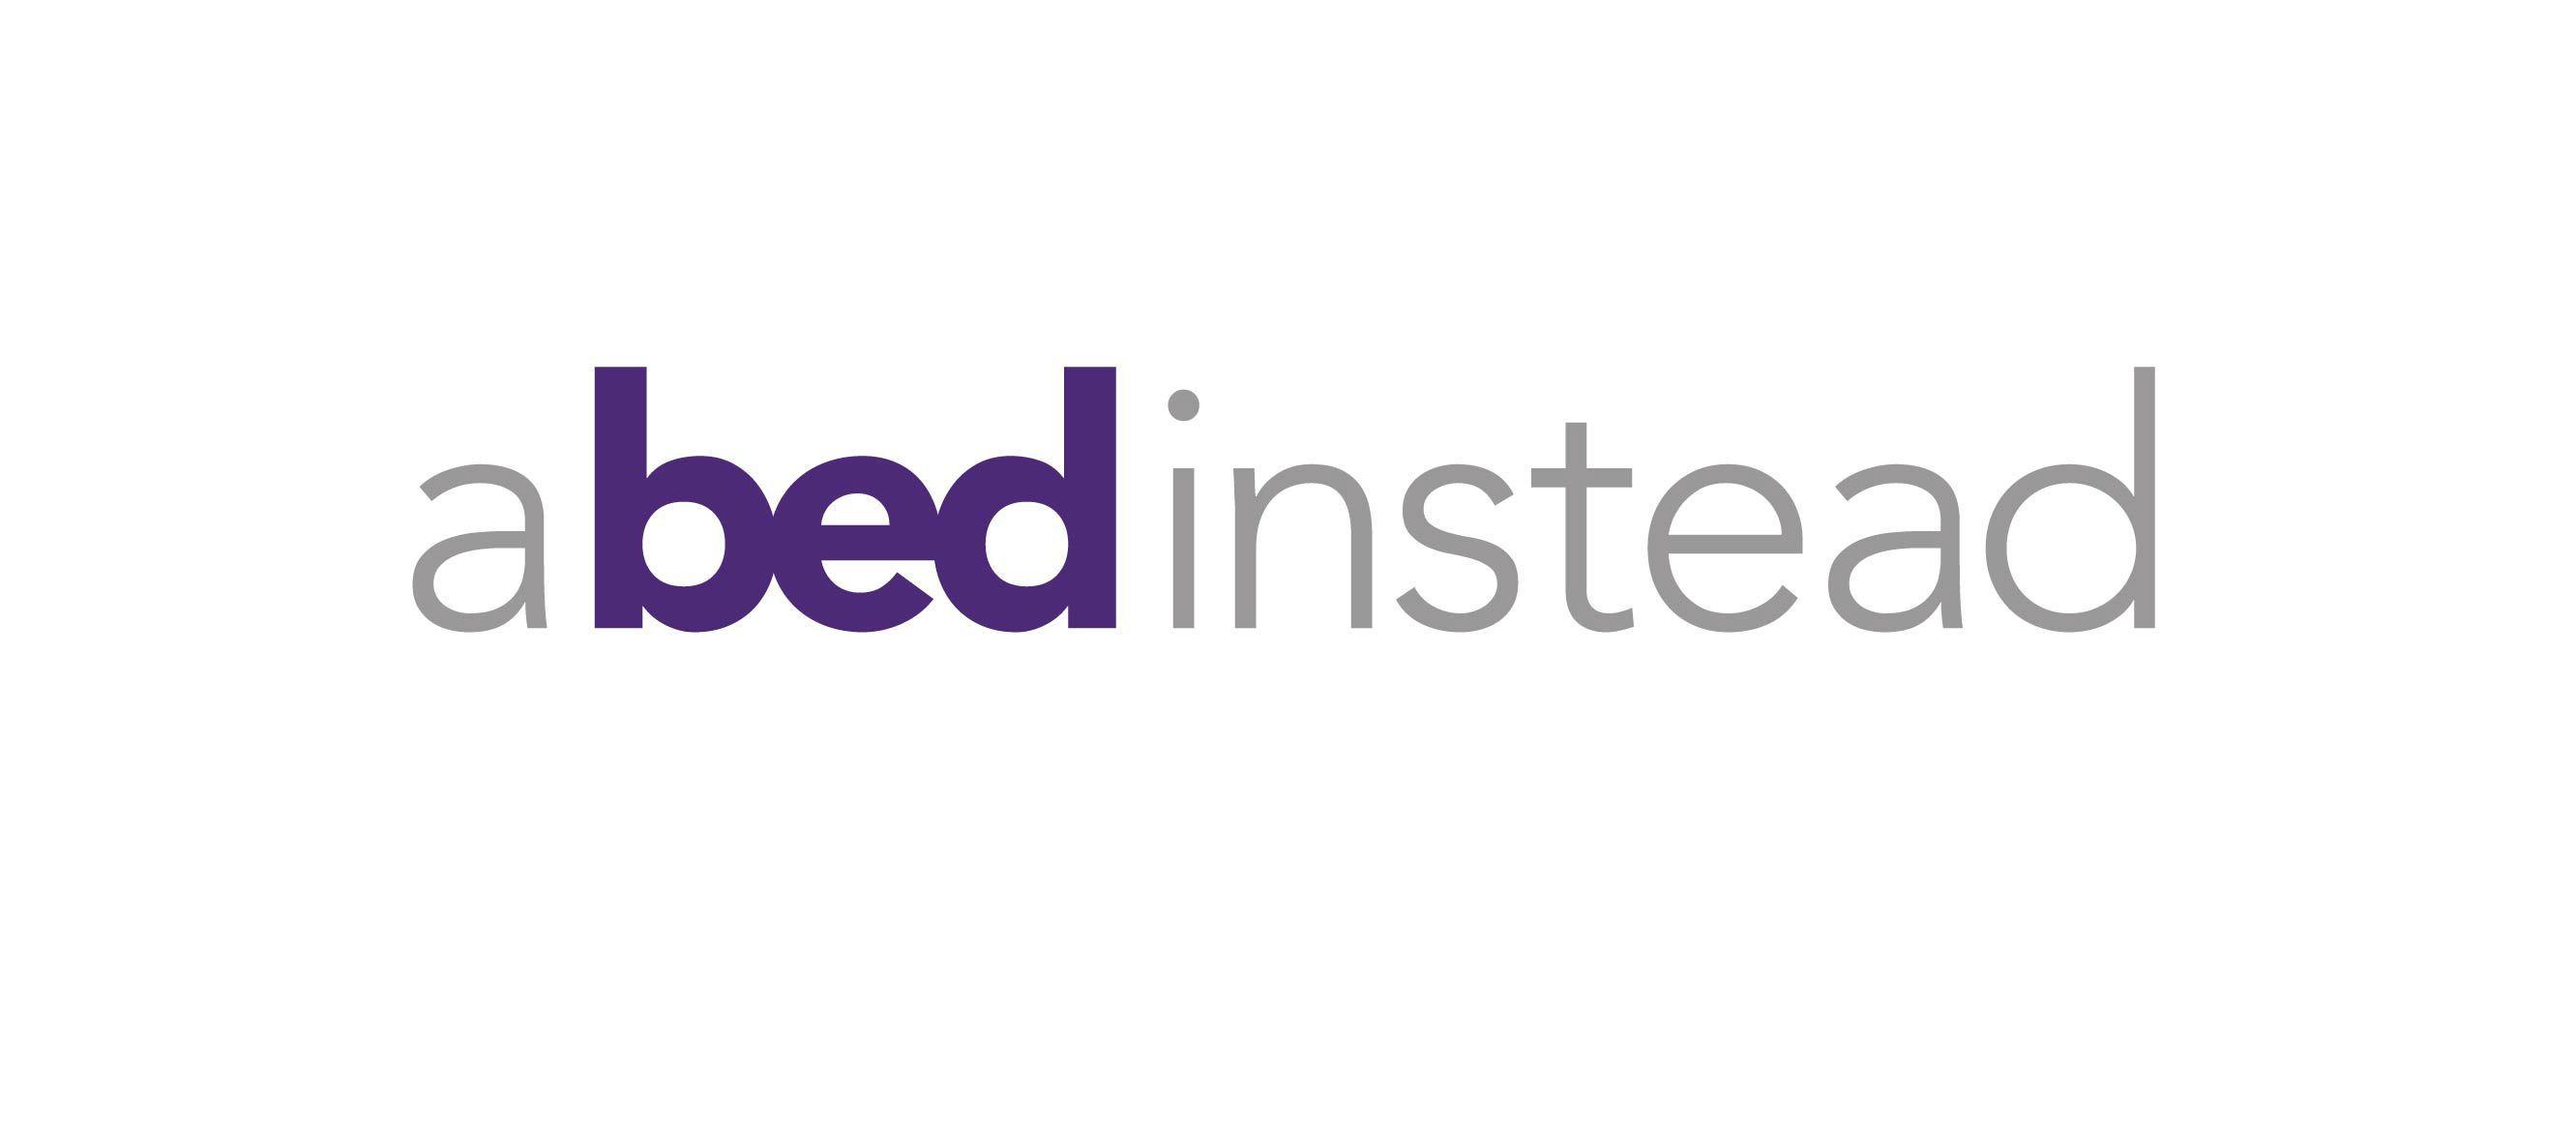 Bed Logo - A Bed Instead - Treatment Advocacy Center